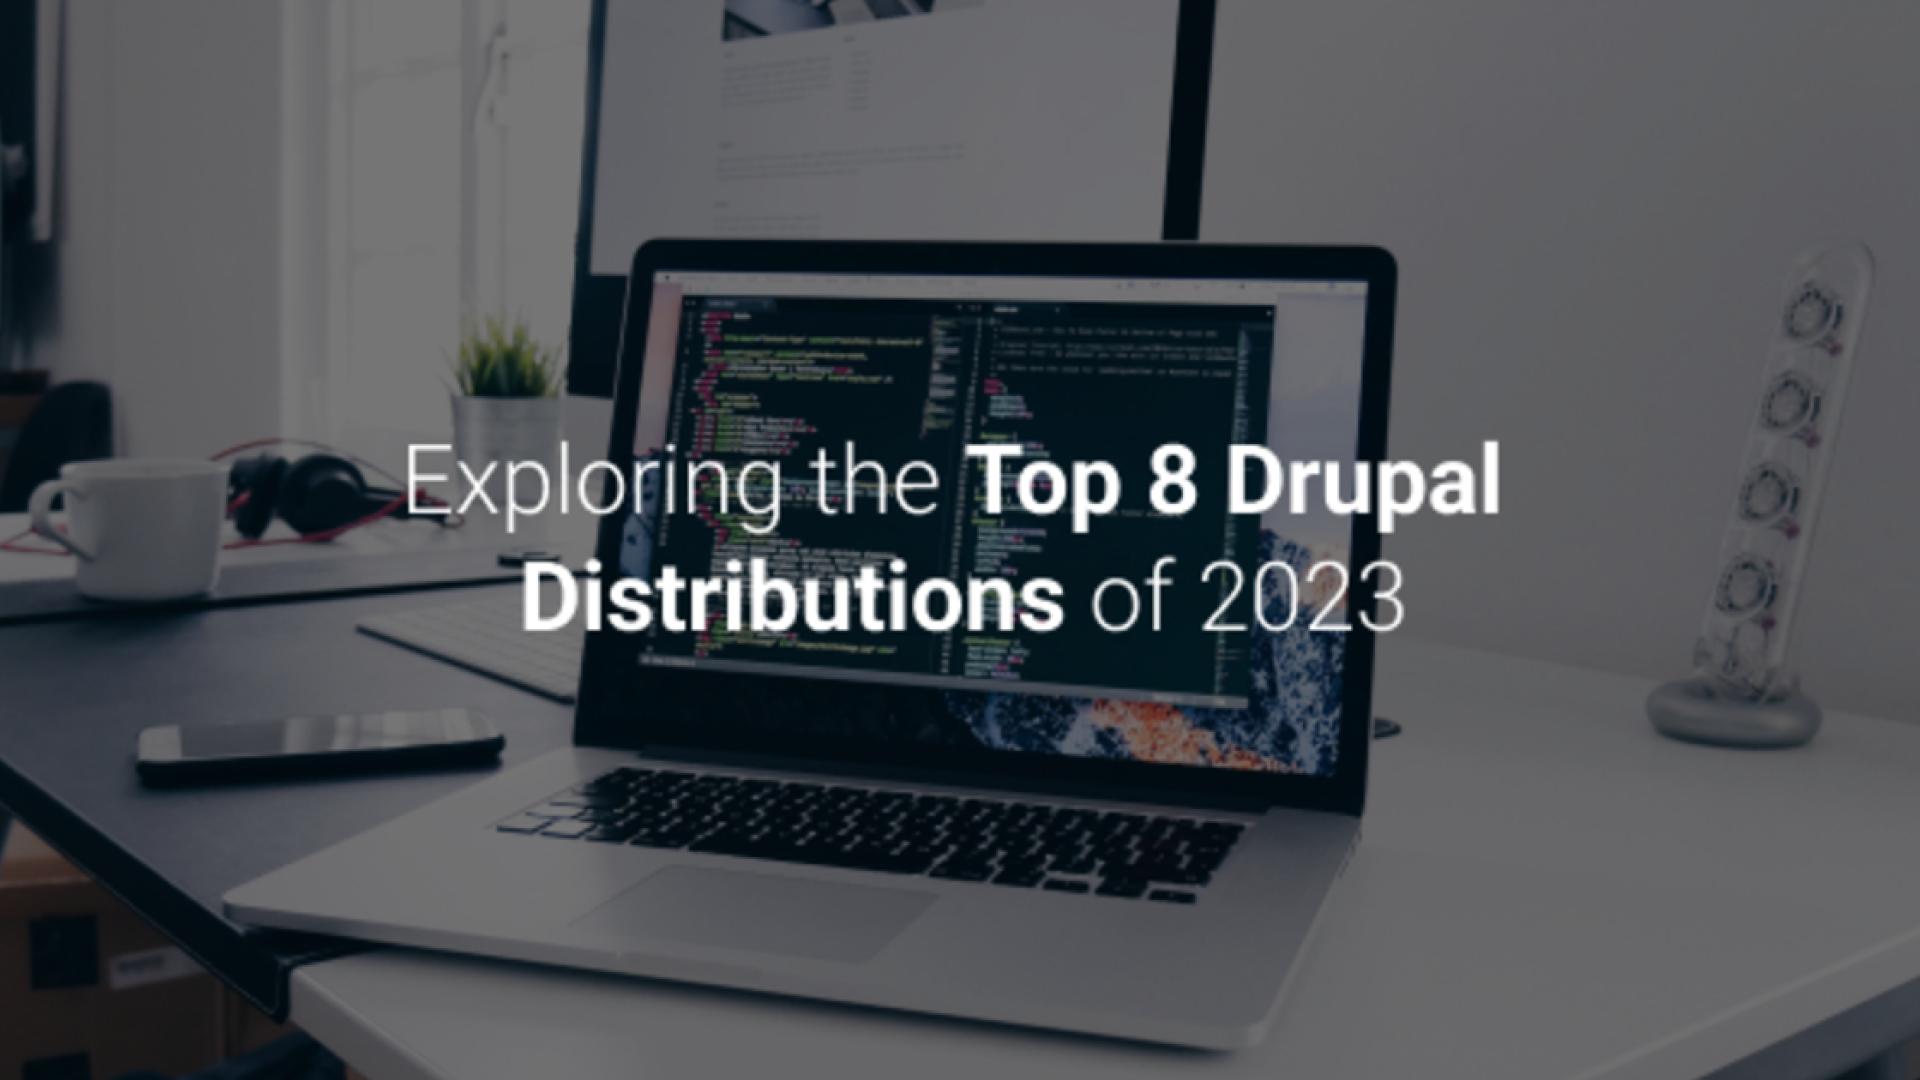 An open laptop on a desk, The image has Exploring the top 8 Drupal Distributions of 2023 written on it.